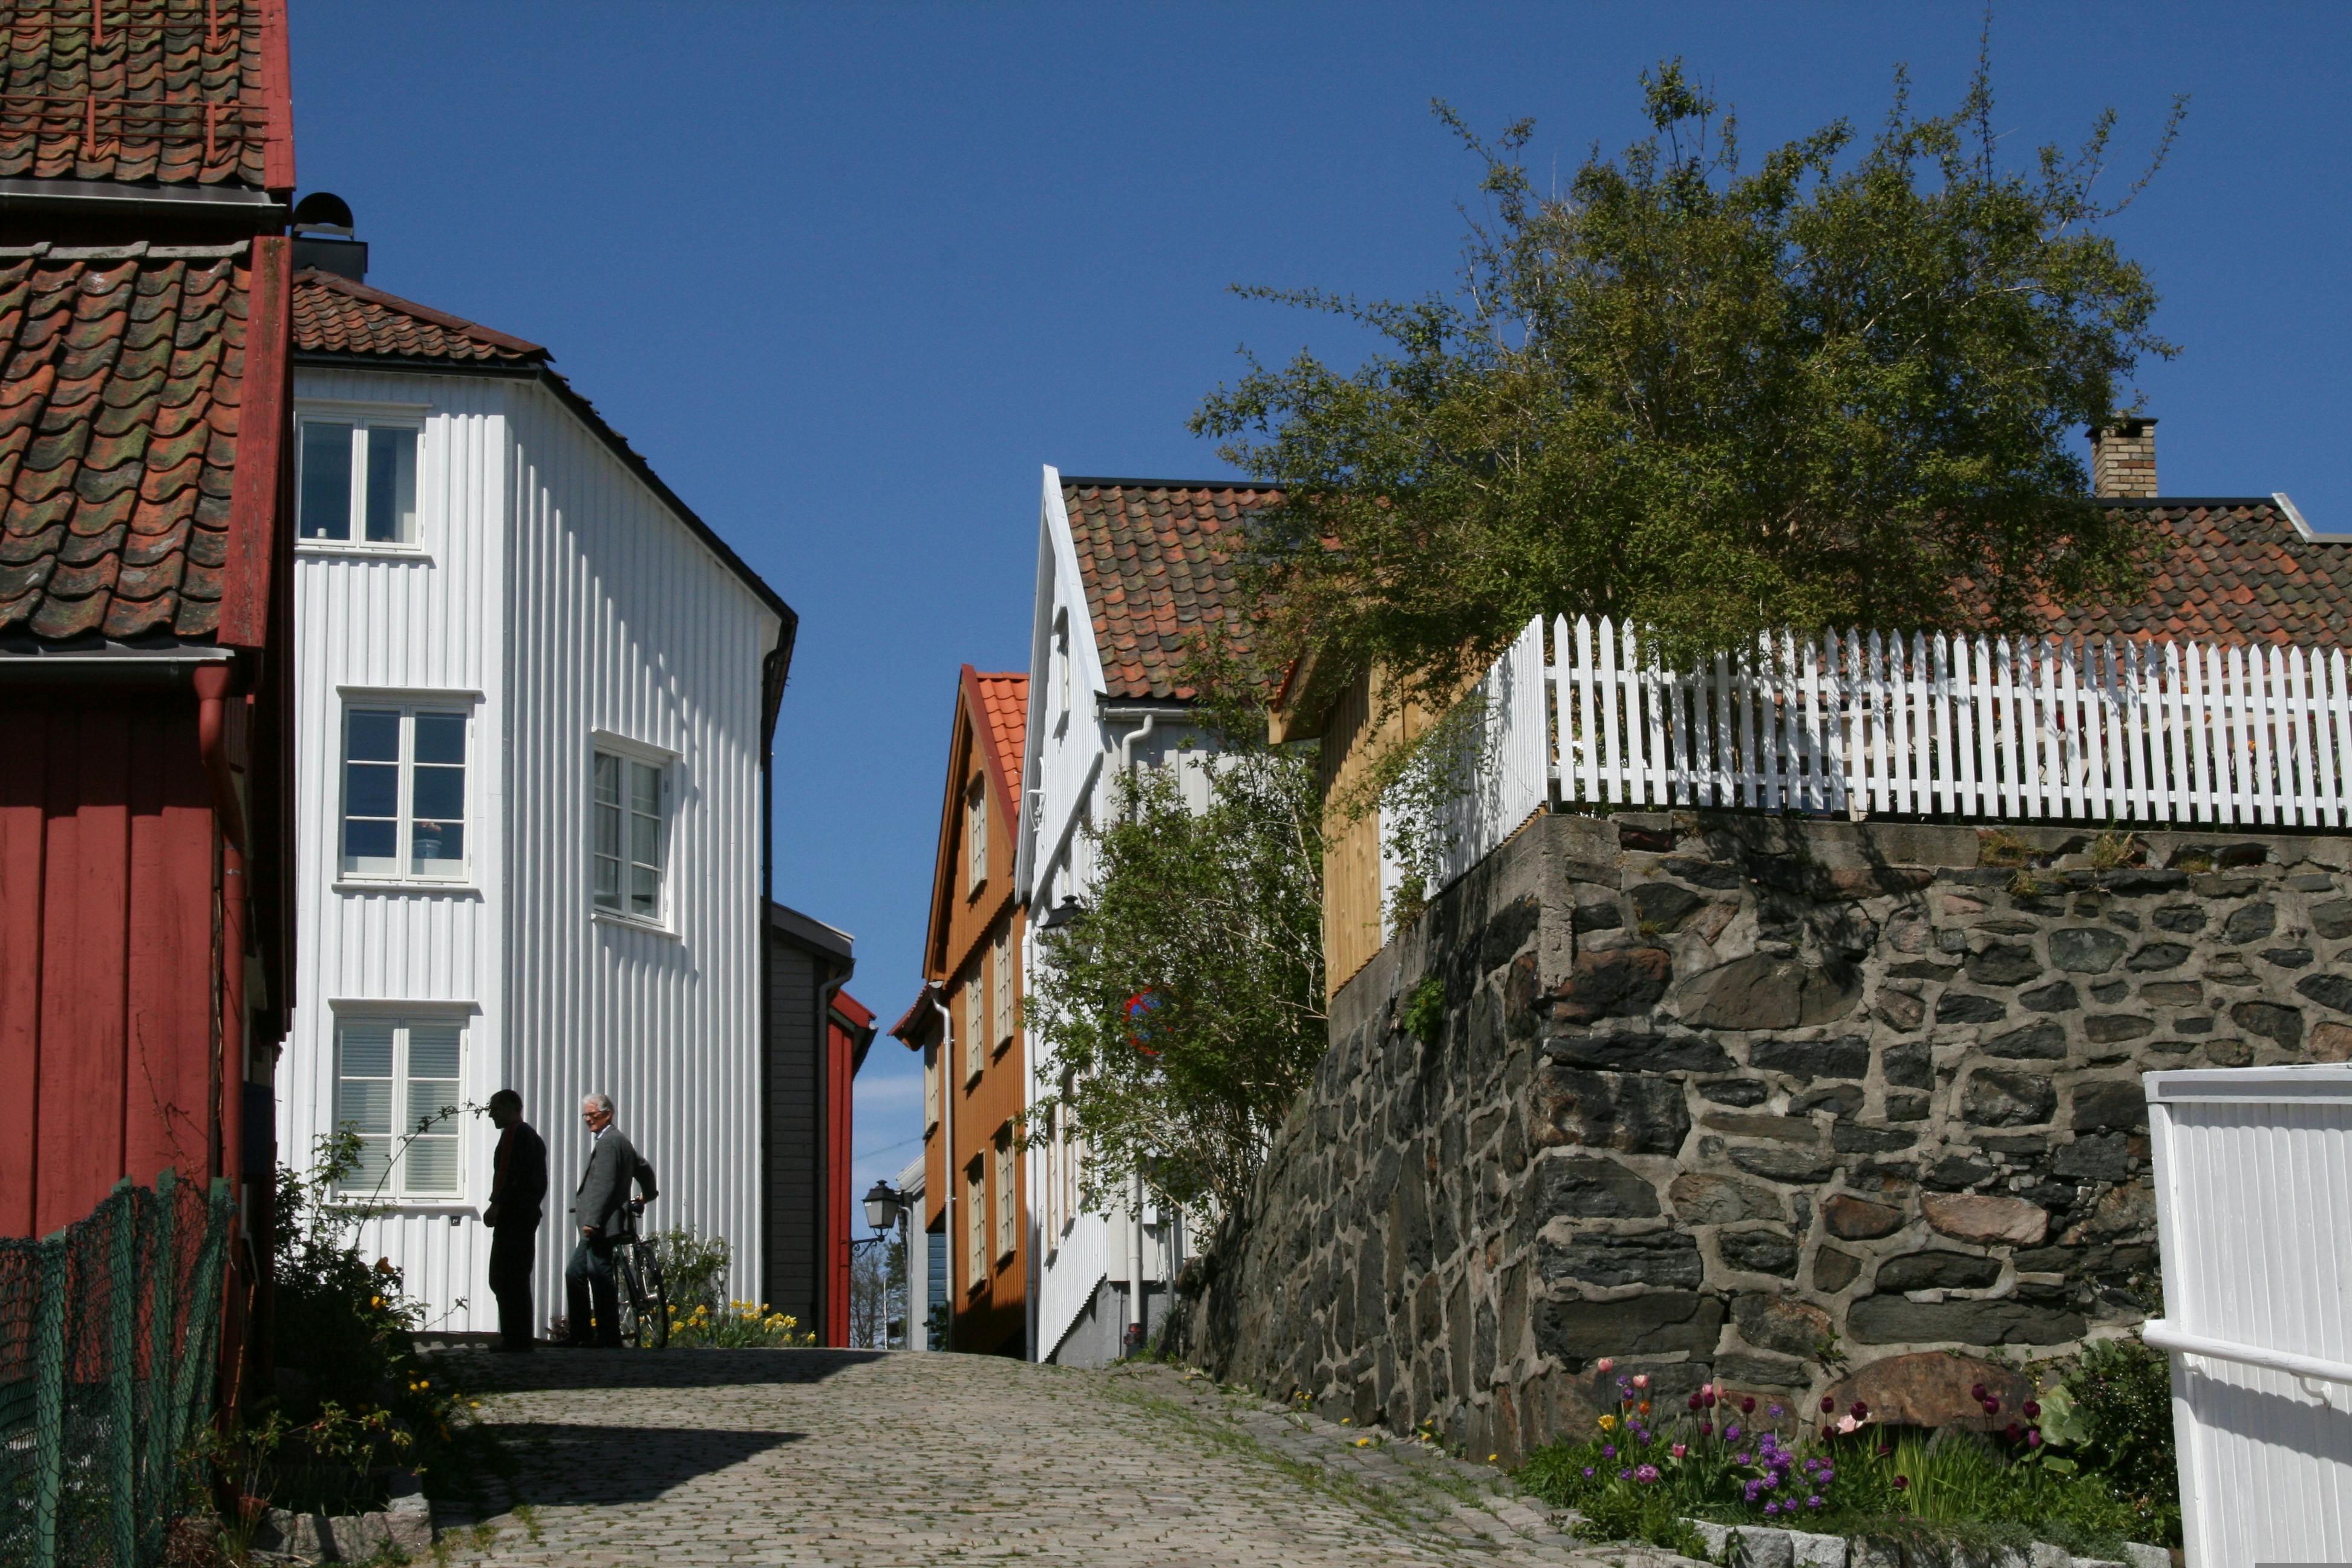 Inspiration of Tyholmen - The old town in Arendal